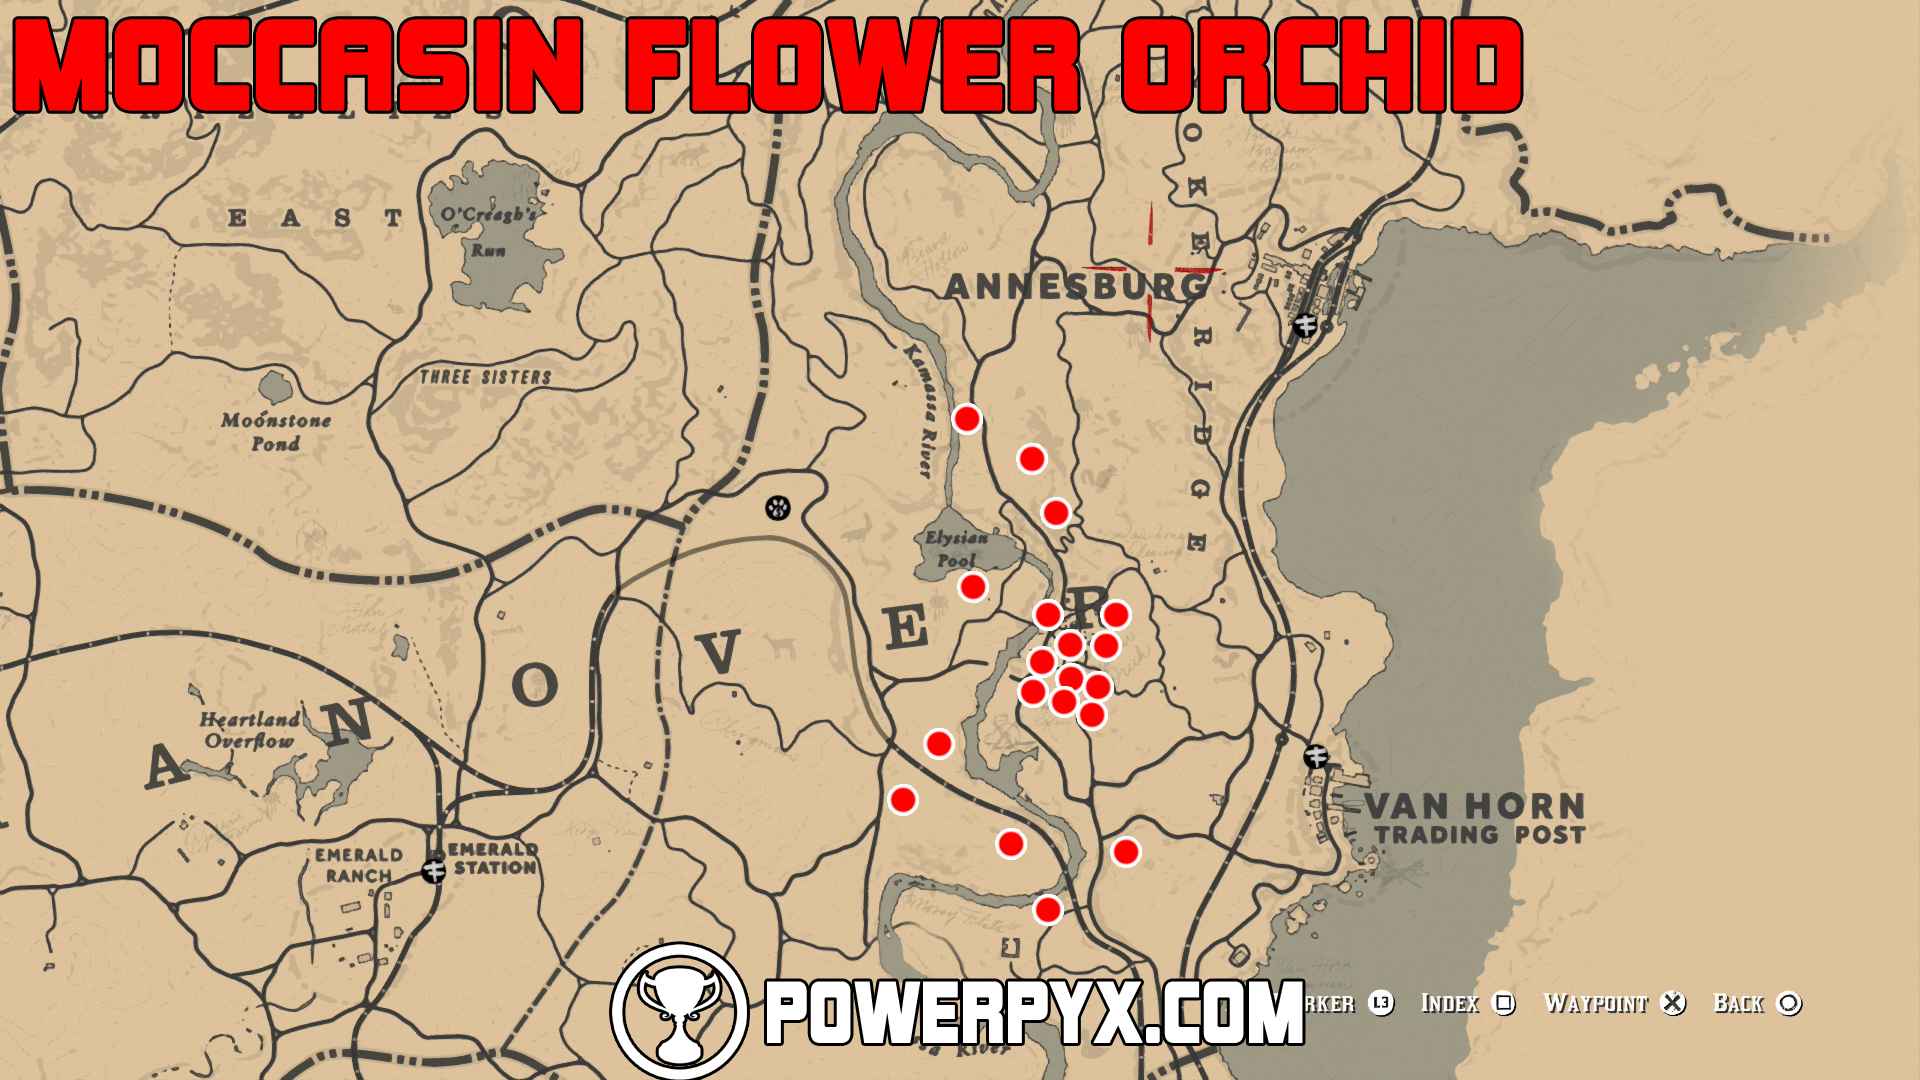 red dead redemption 2 exotic moccasin flower orchid location